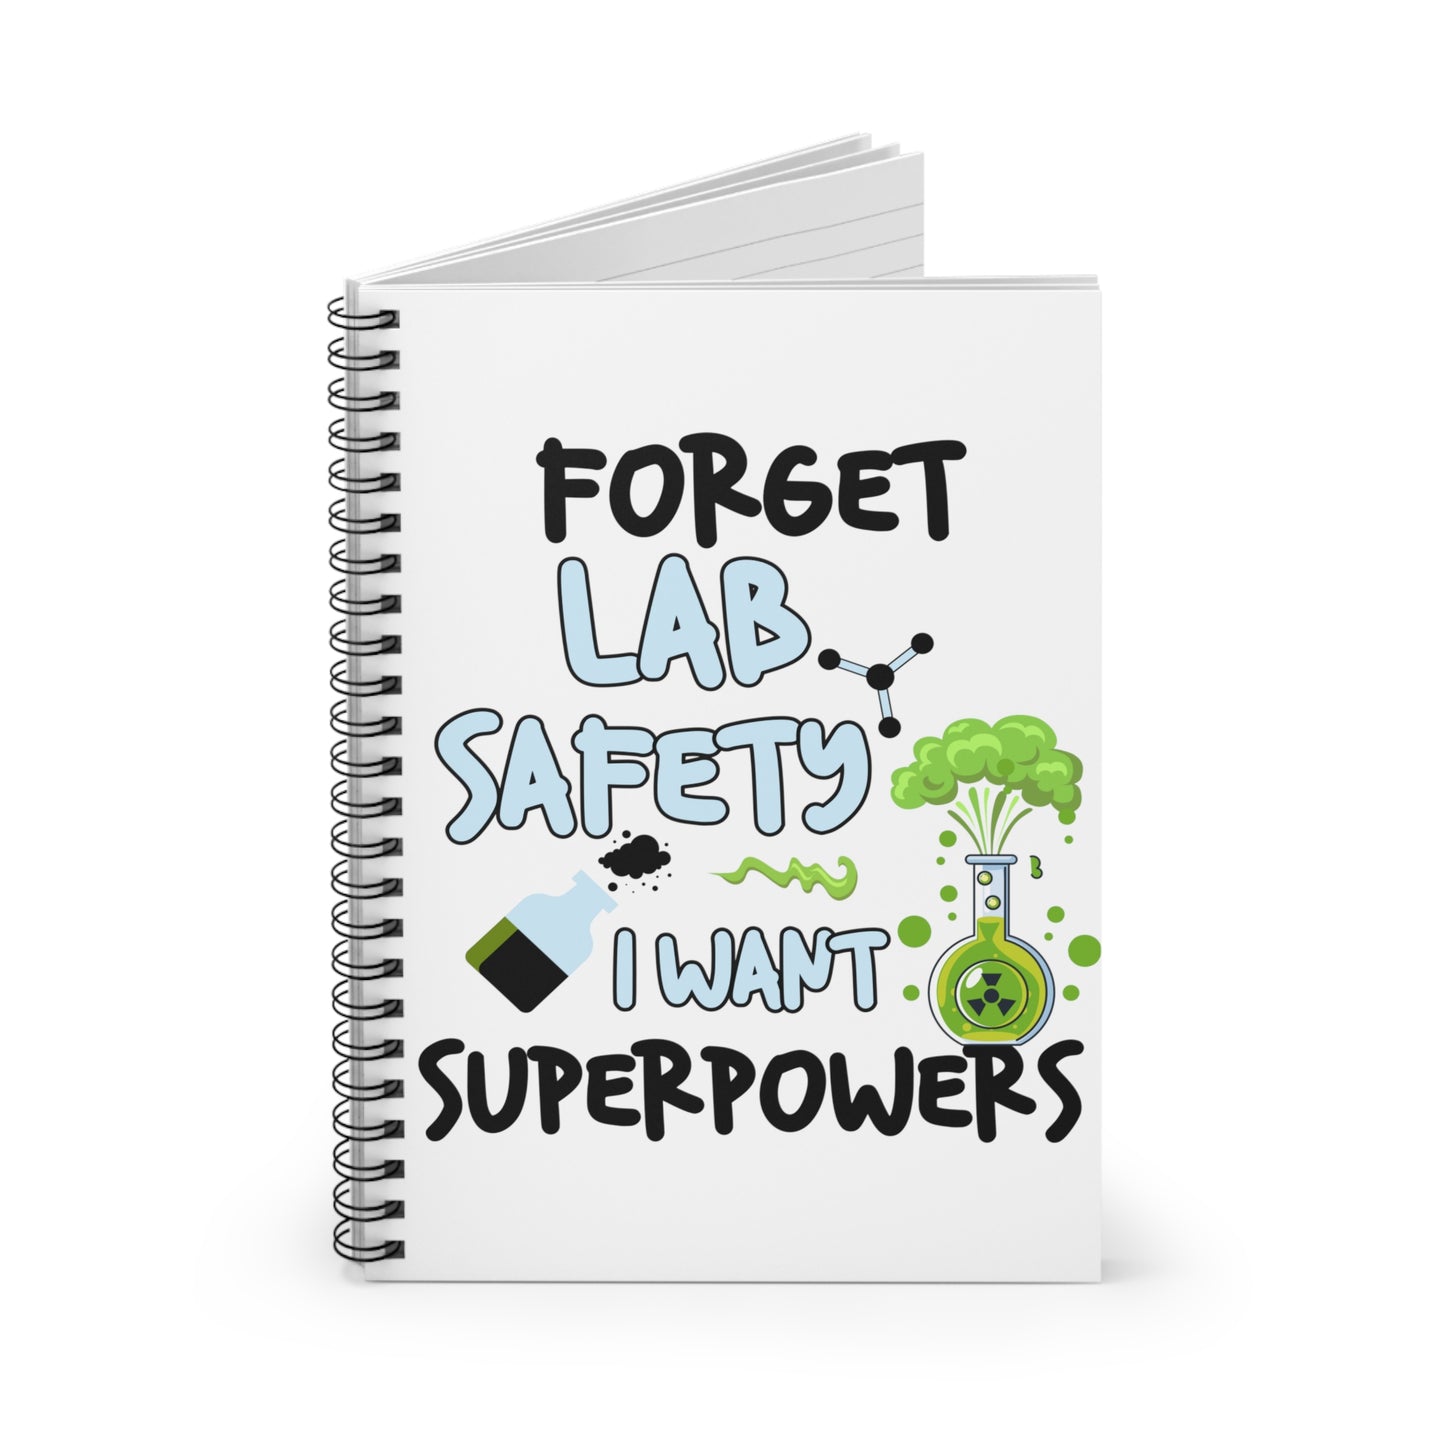 I Want Superpowers: Spiral Notebook - Log Books - Journals - Diaries - and More Custom Printed by TheGlassyLass